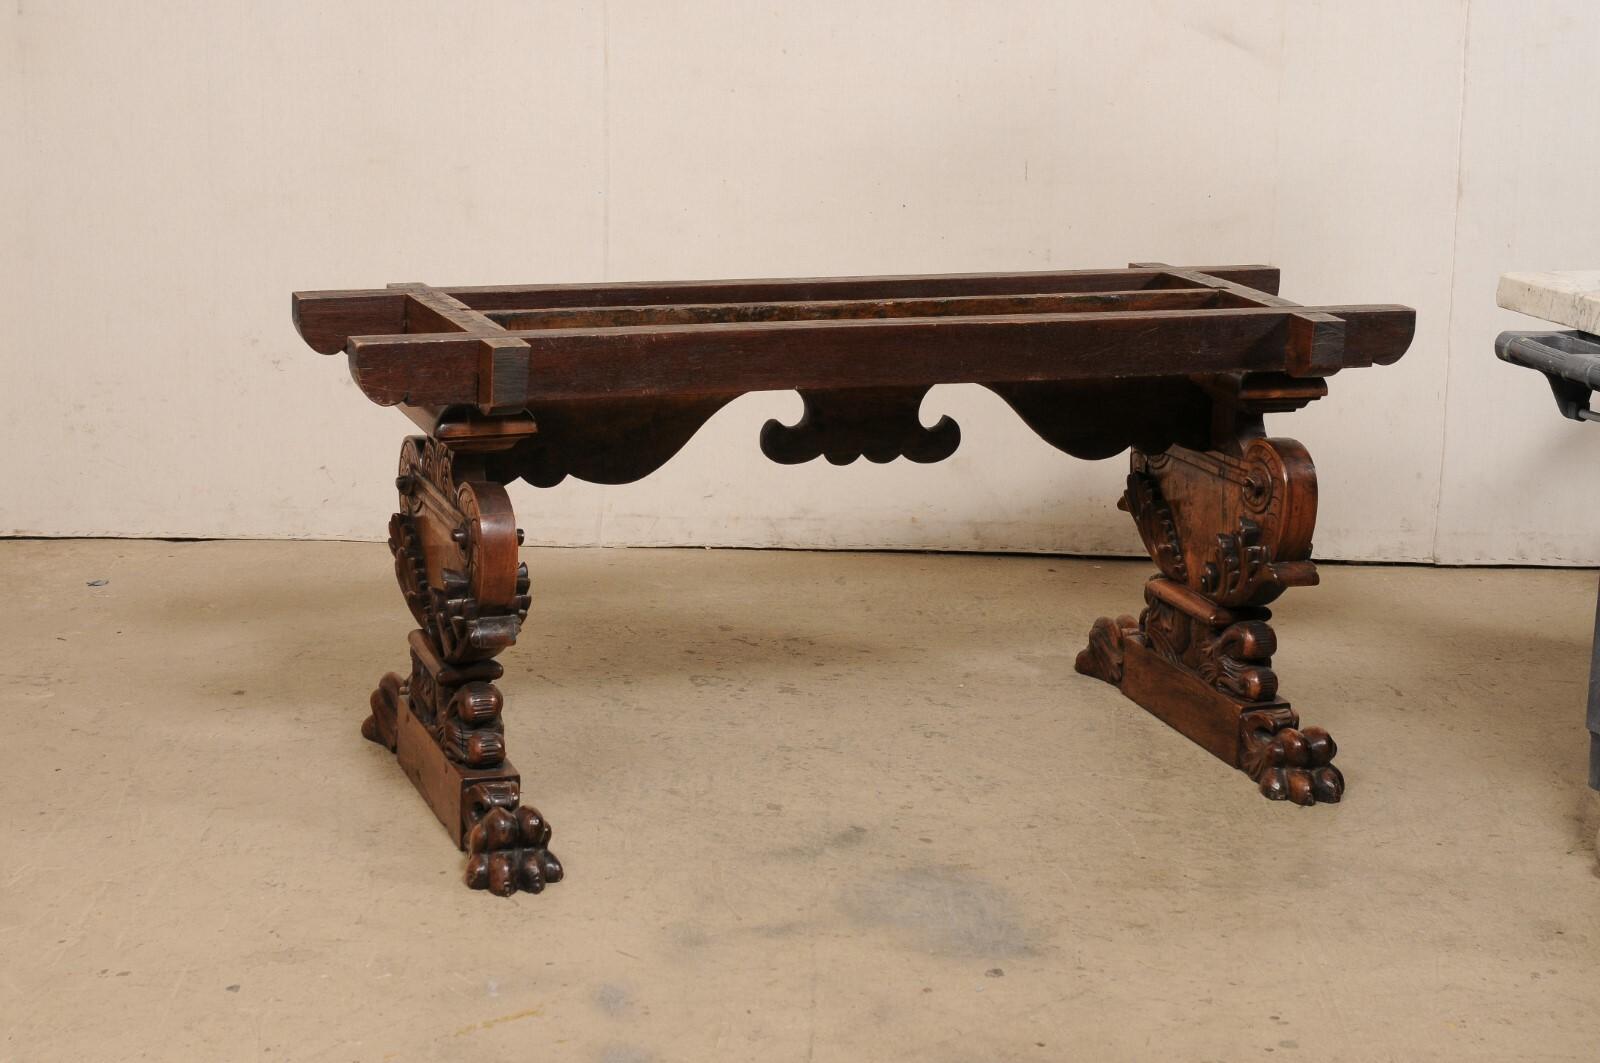 An Italian meticulously carved-wood table with inlaid marble top from the 18th century. This antique table from Italy, approximately 6.25 feet in length, features a 2